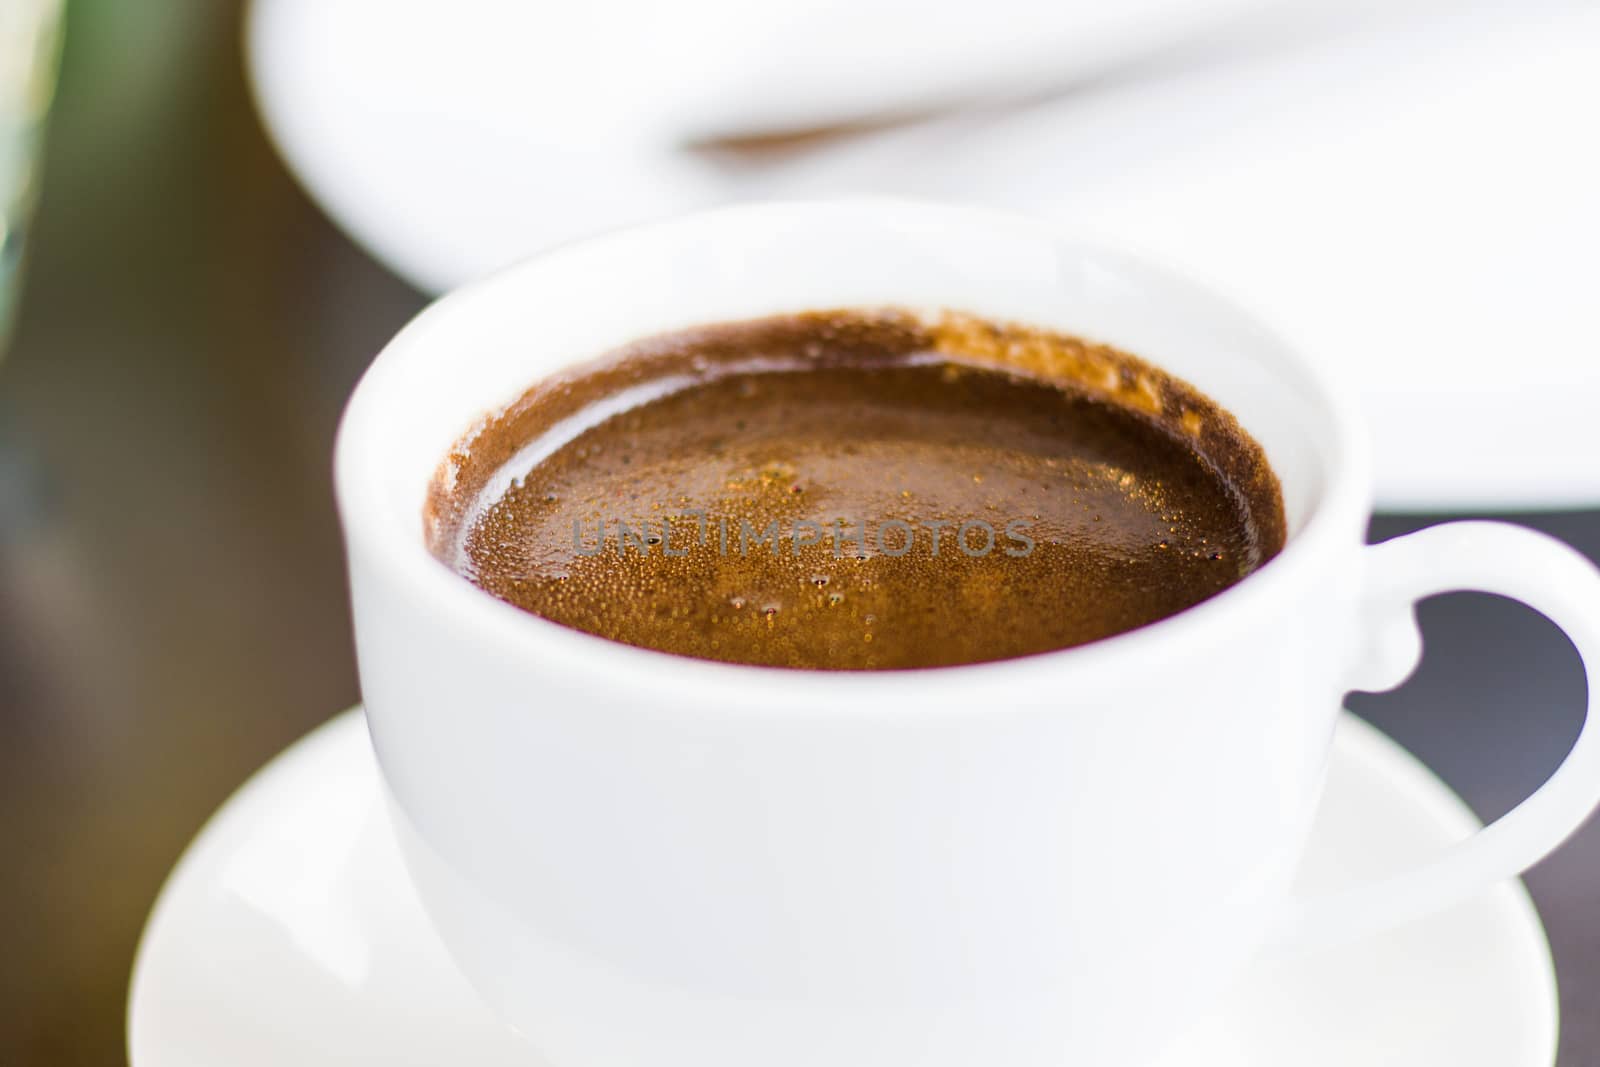 Turkish cup pf coffee, dark coffee close-up and macro, hot aromatic drink in white cup